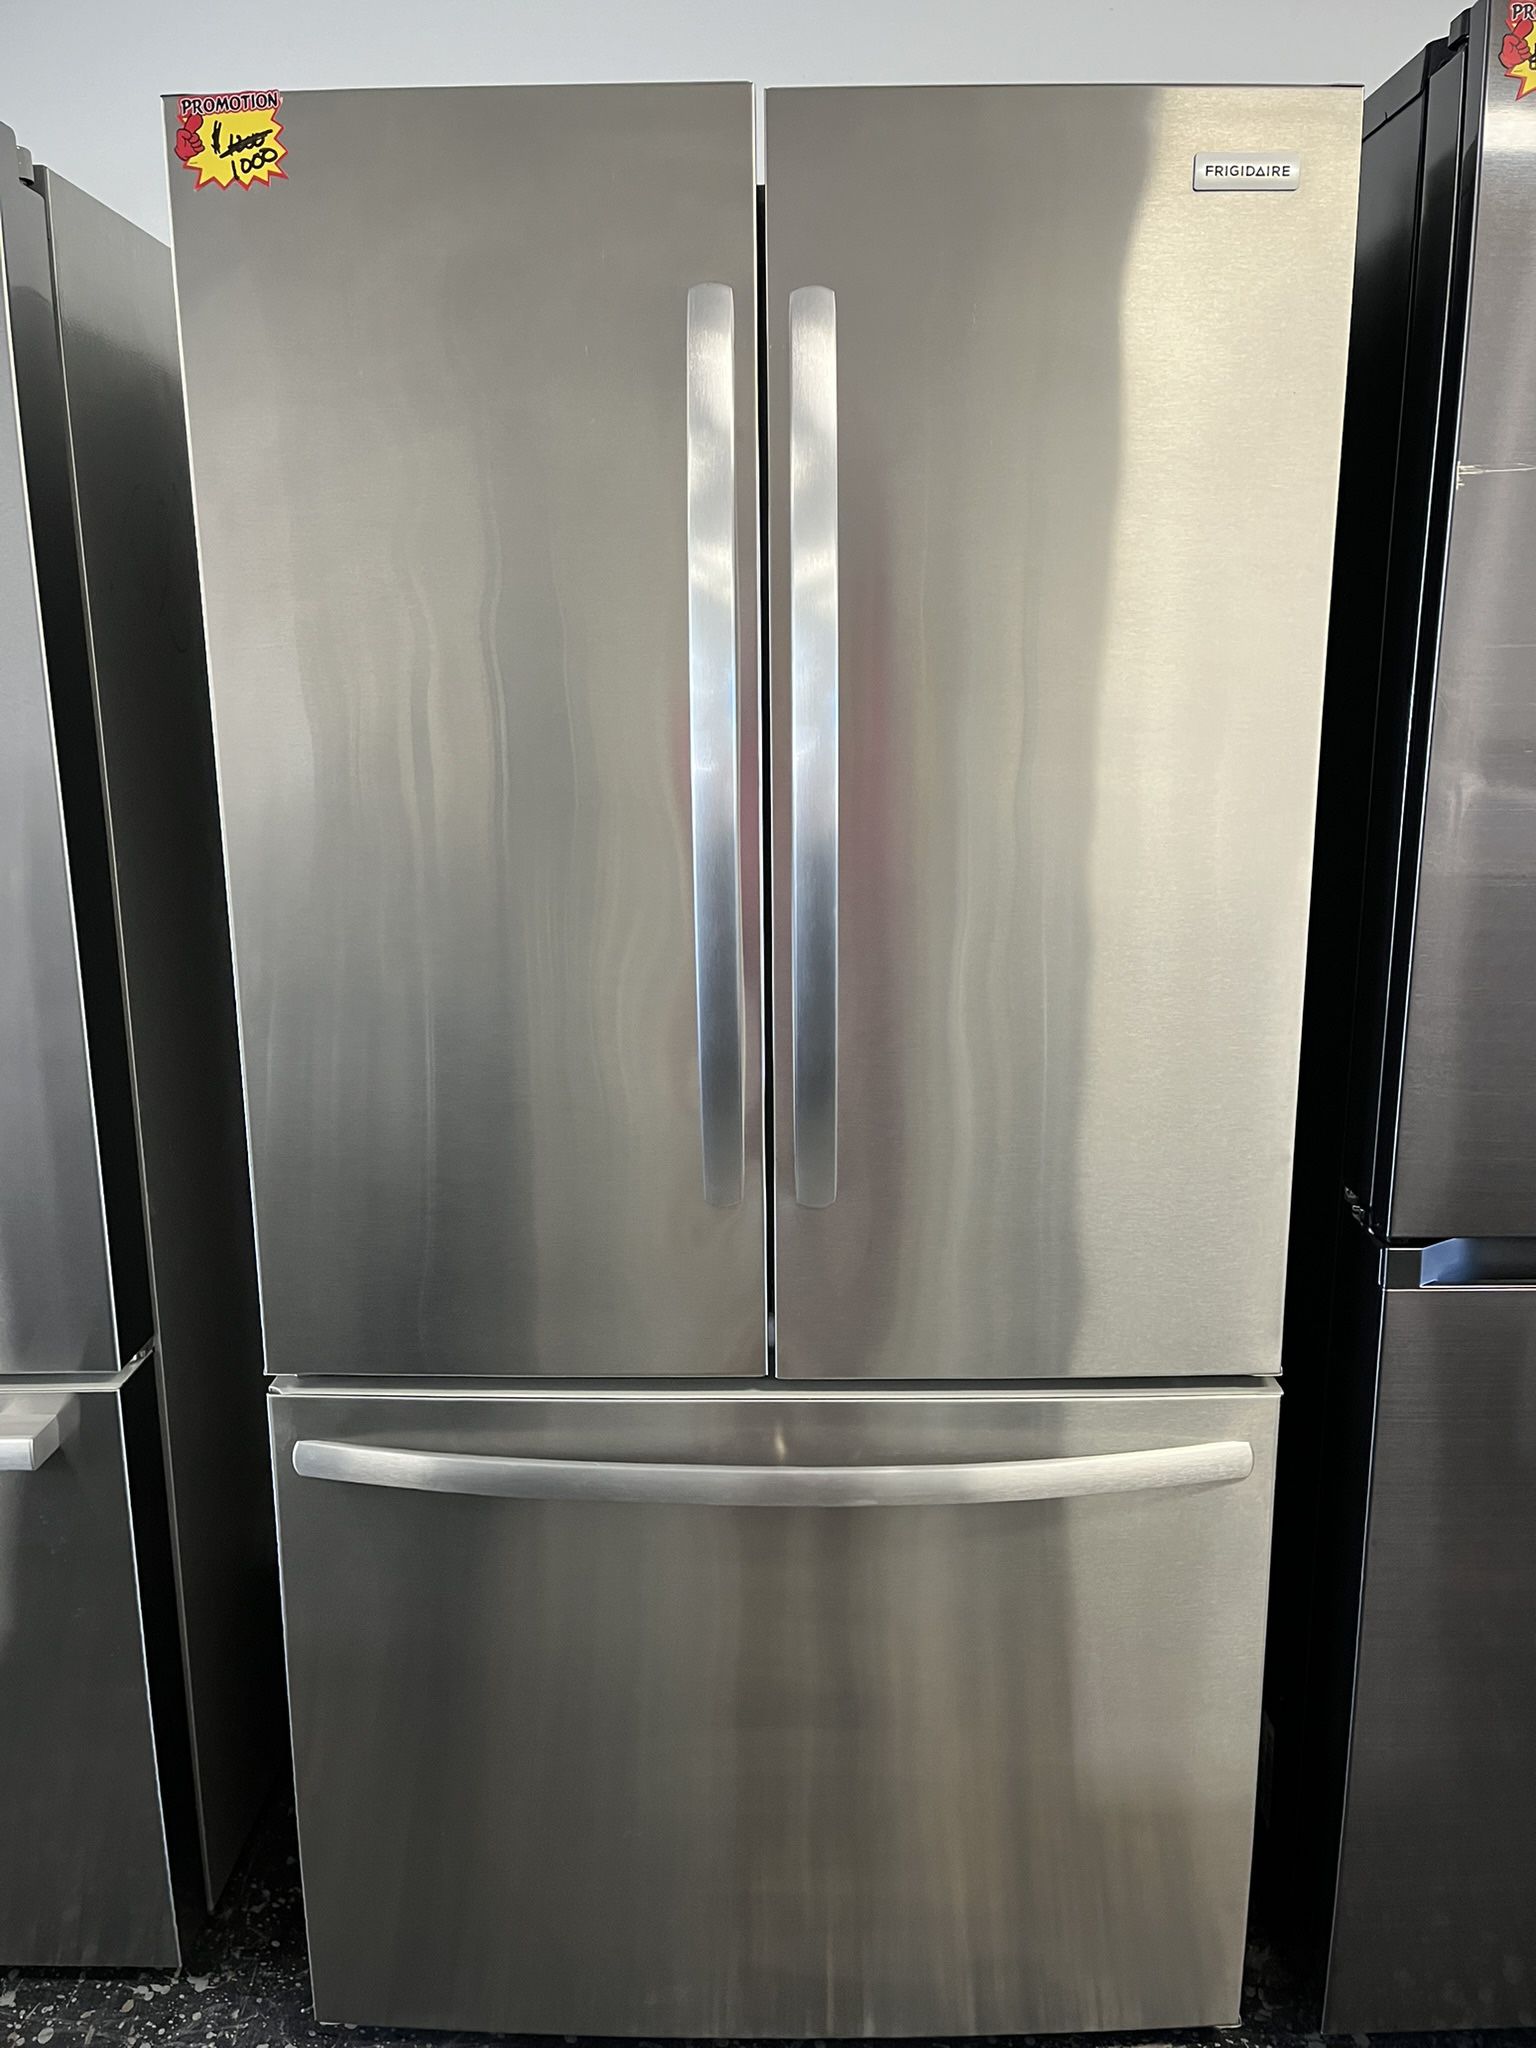 ‼️‼️ Frigidaire French Door Refrigerator Stainless Steel ‼️‼️